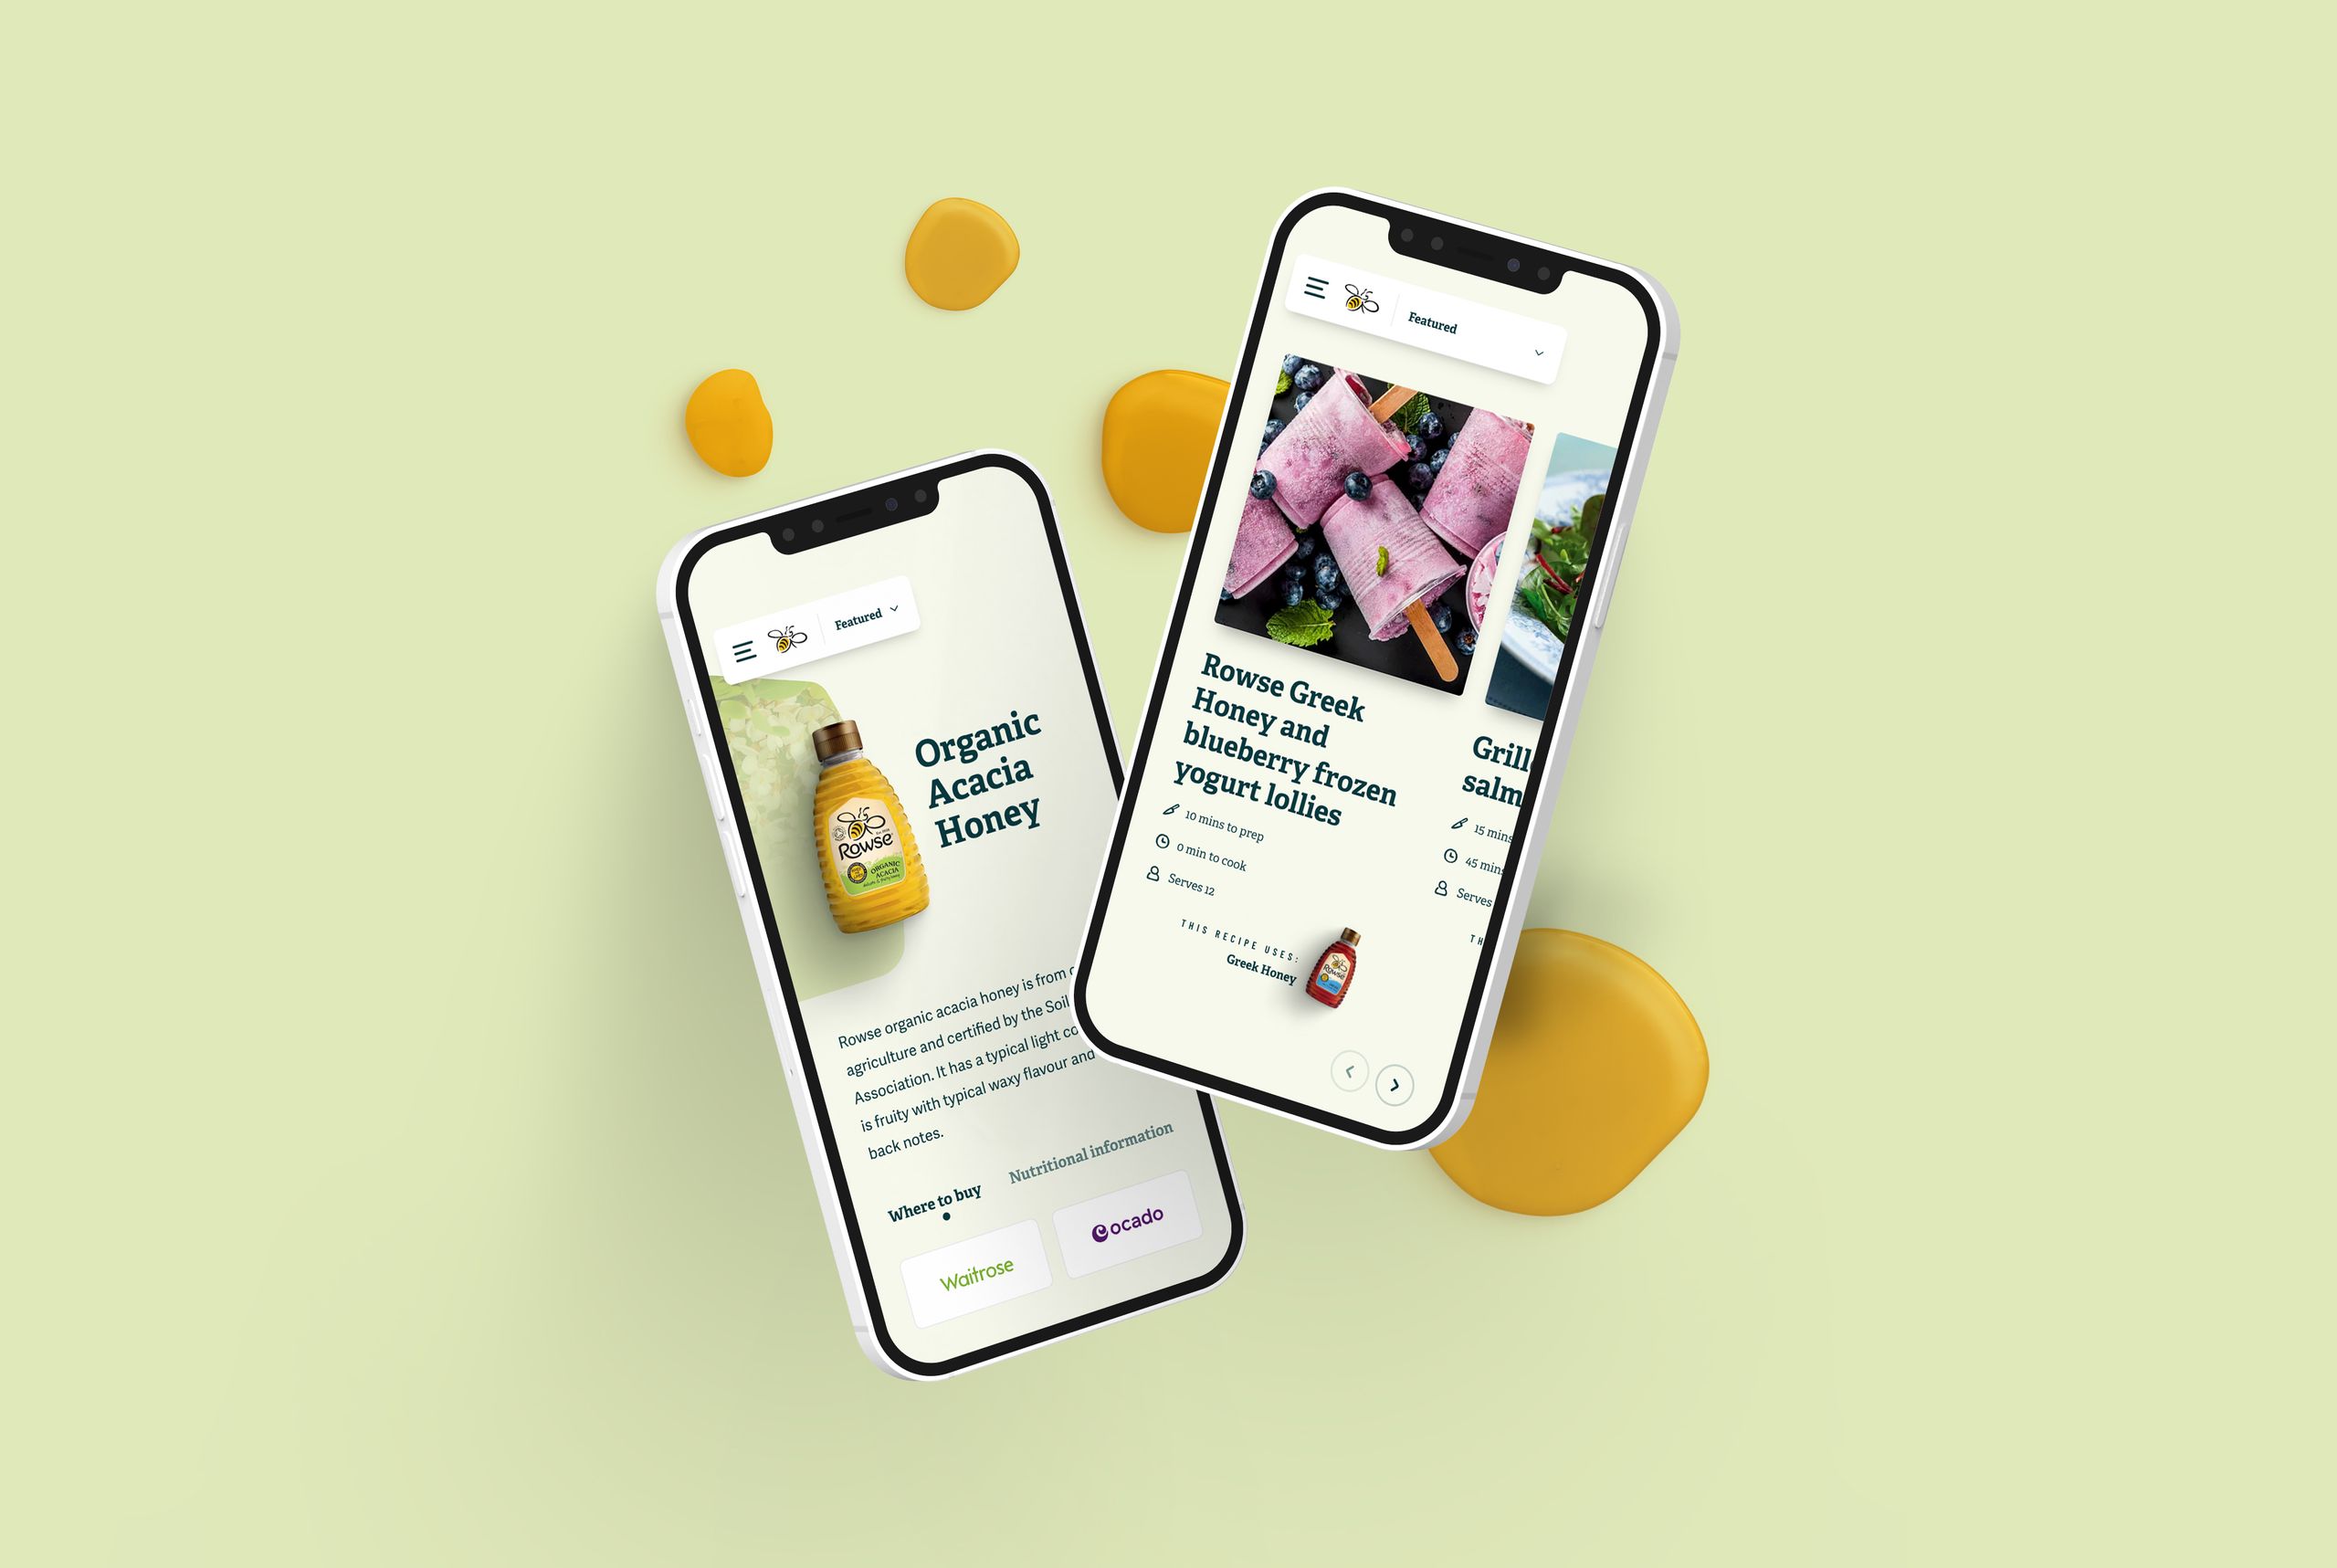 Rowse Honey website displayed on two floating iPhones